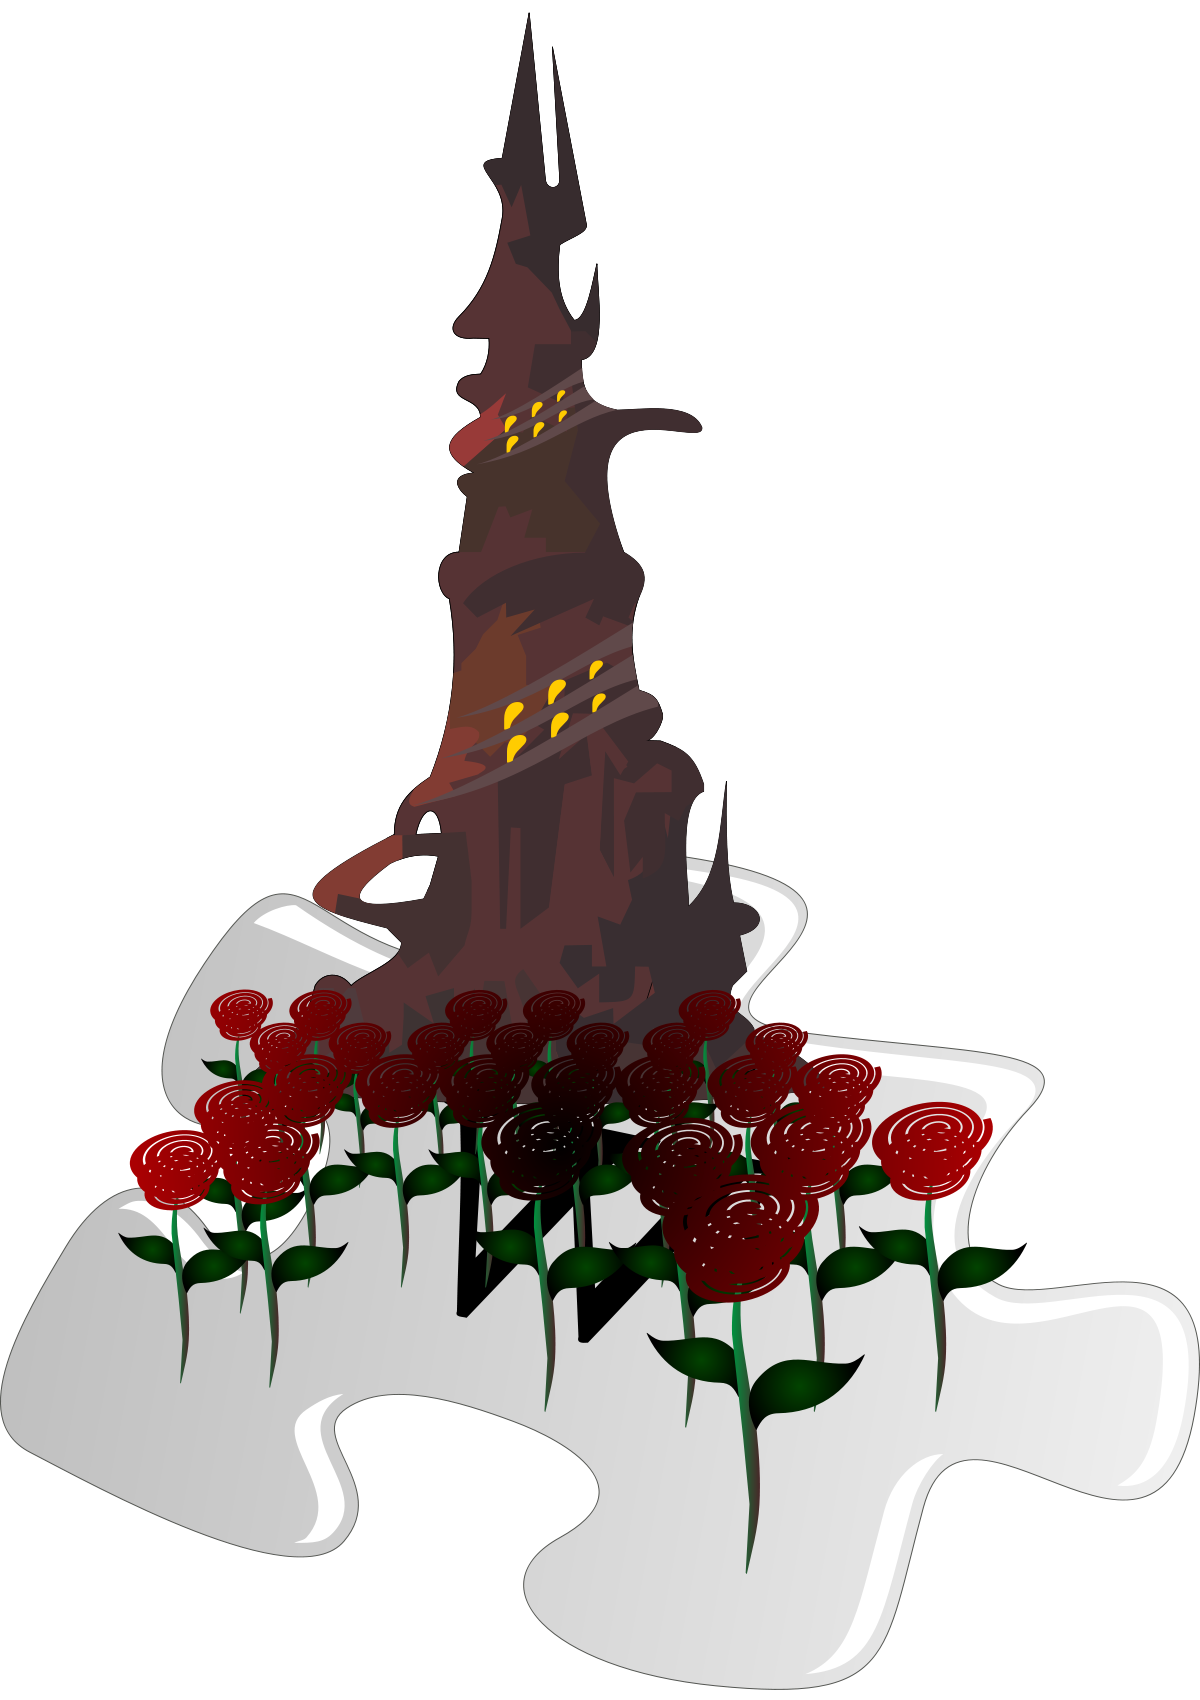 Empty tomb clipart open grave. The dark tower series